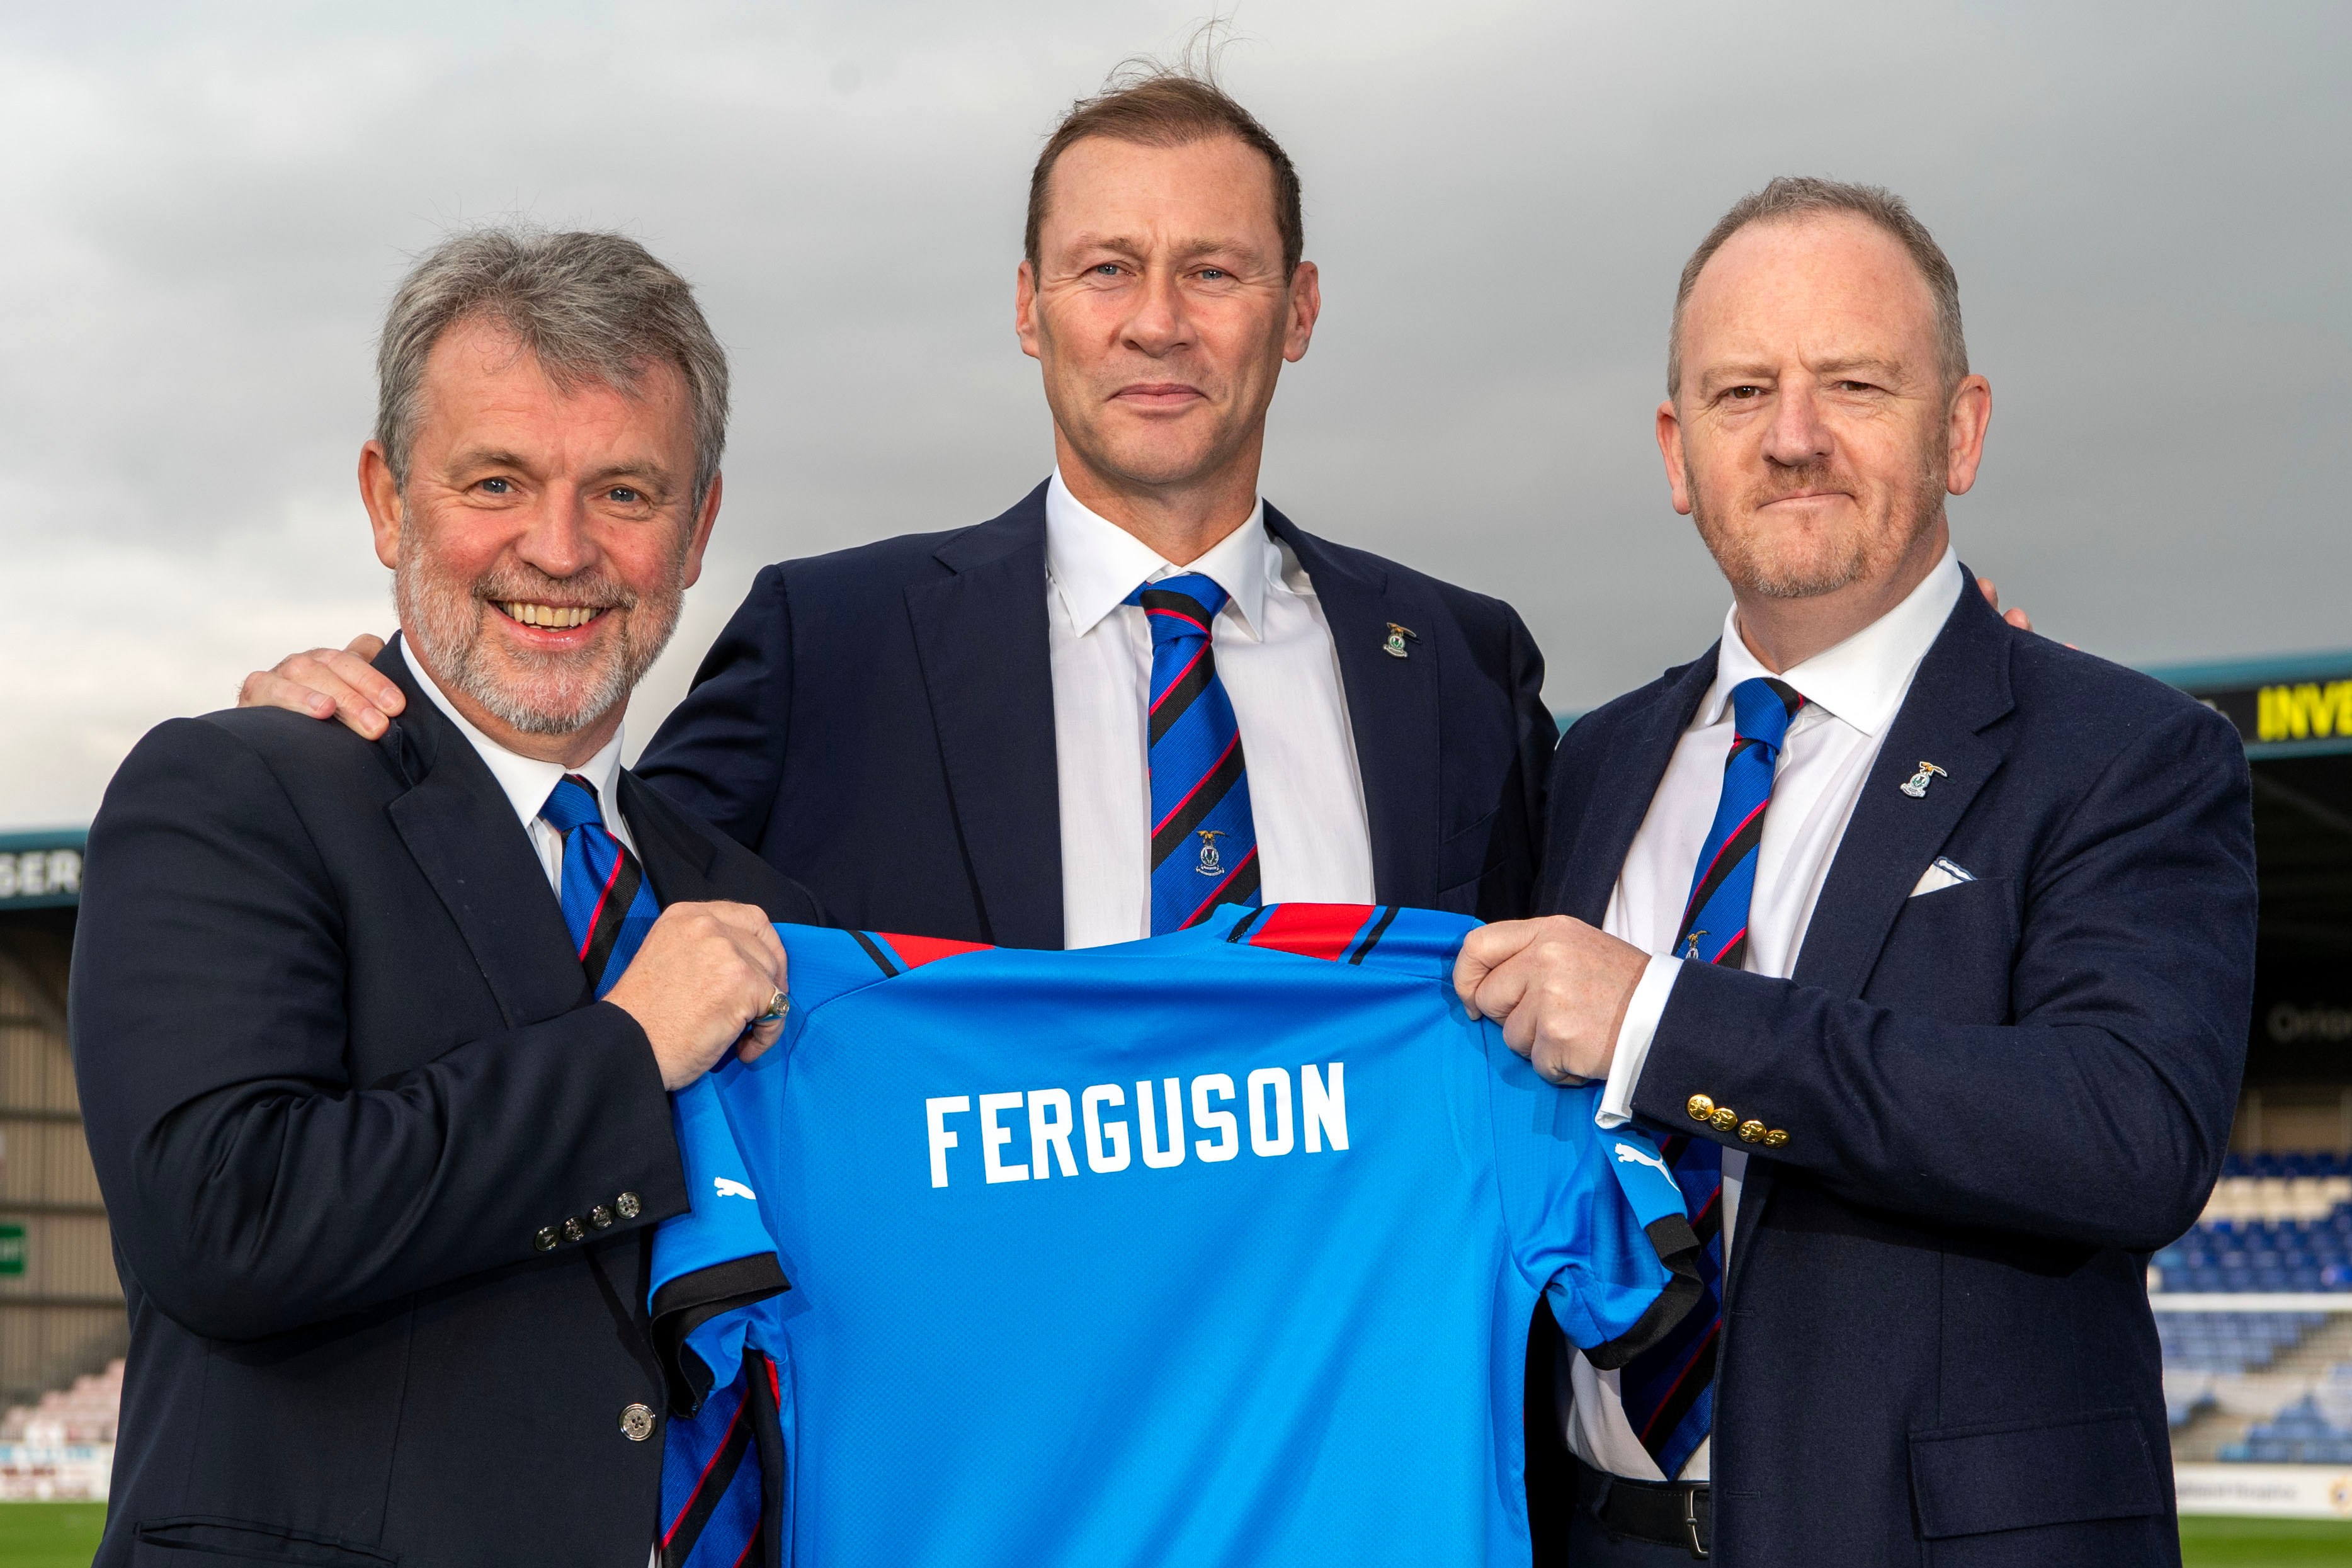 Duncan Ferguson, centre, was unveiled as Inverness manager by Ross Morrison, left, and Scot Gardiner in September, both of whom have since resigned